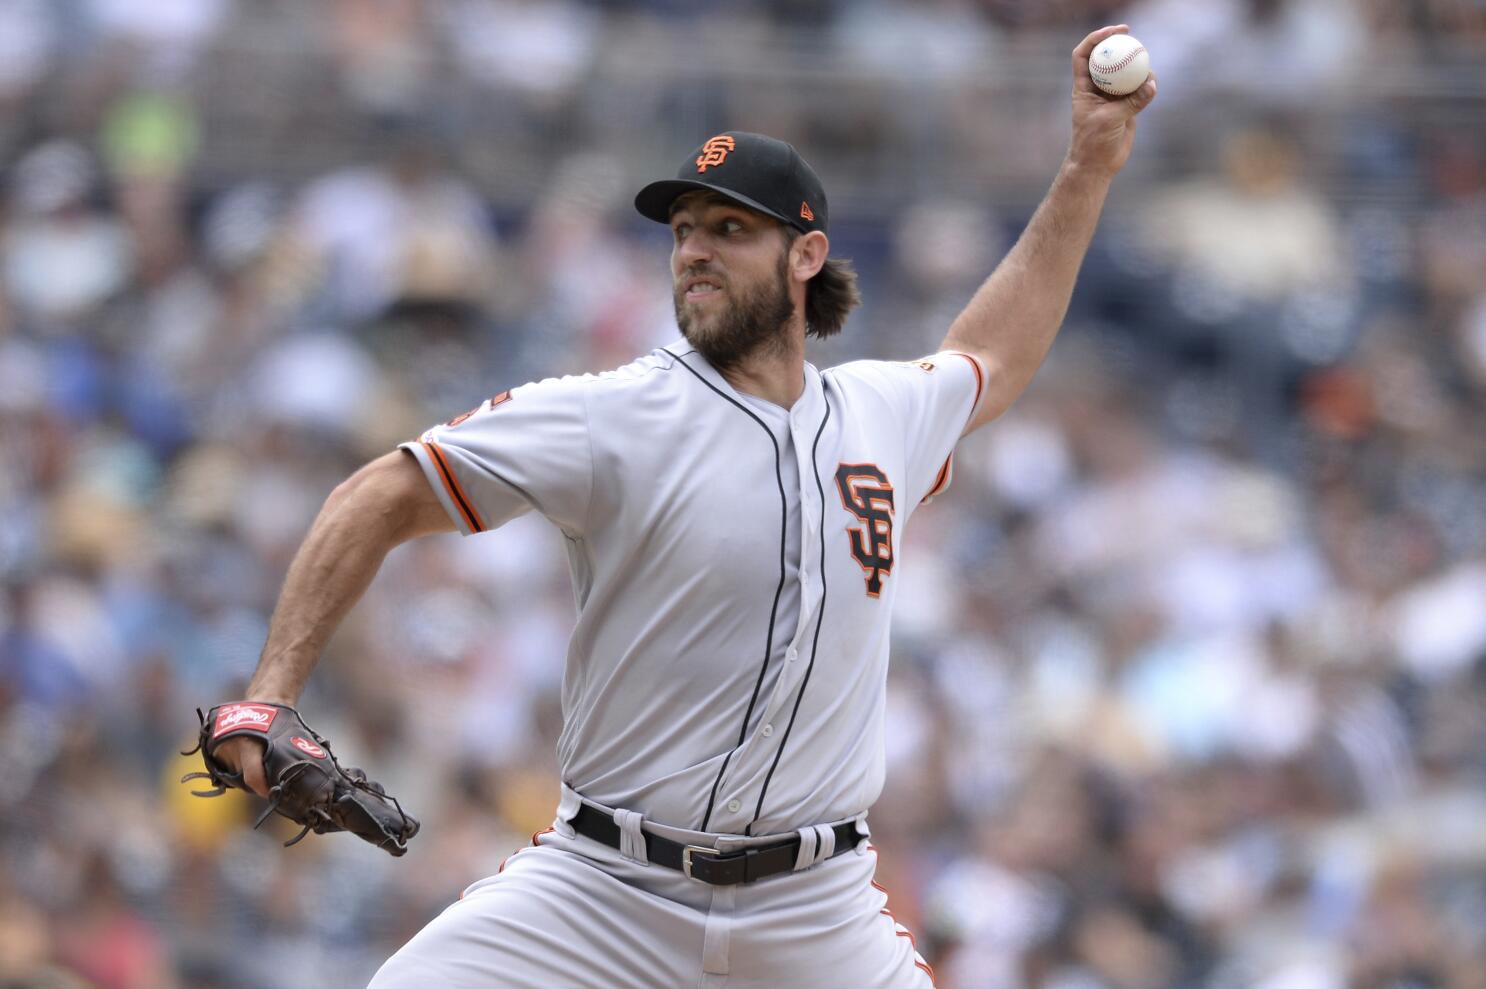 Madison Bumgarner 'not going to pitch' Bochy's final game